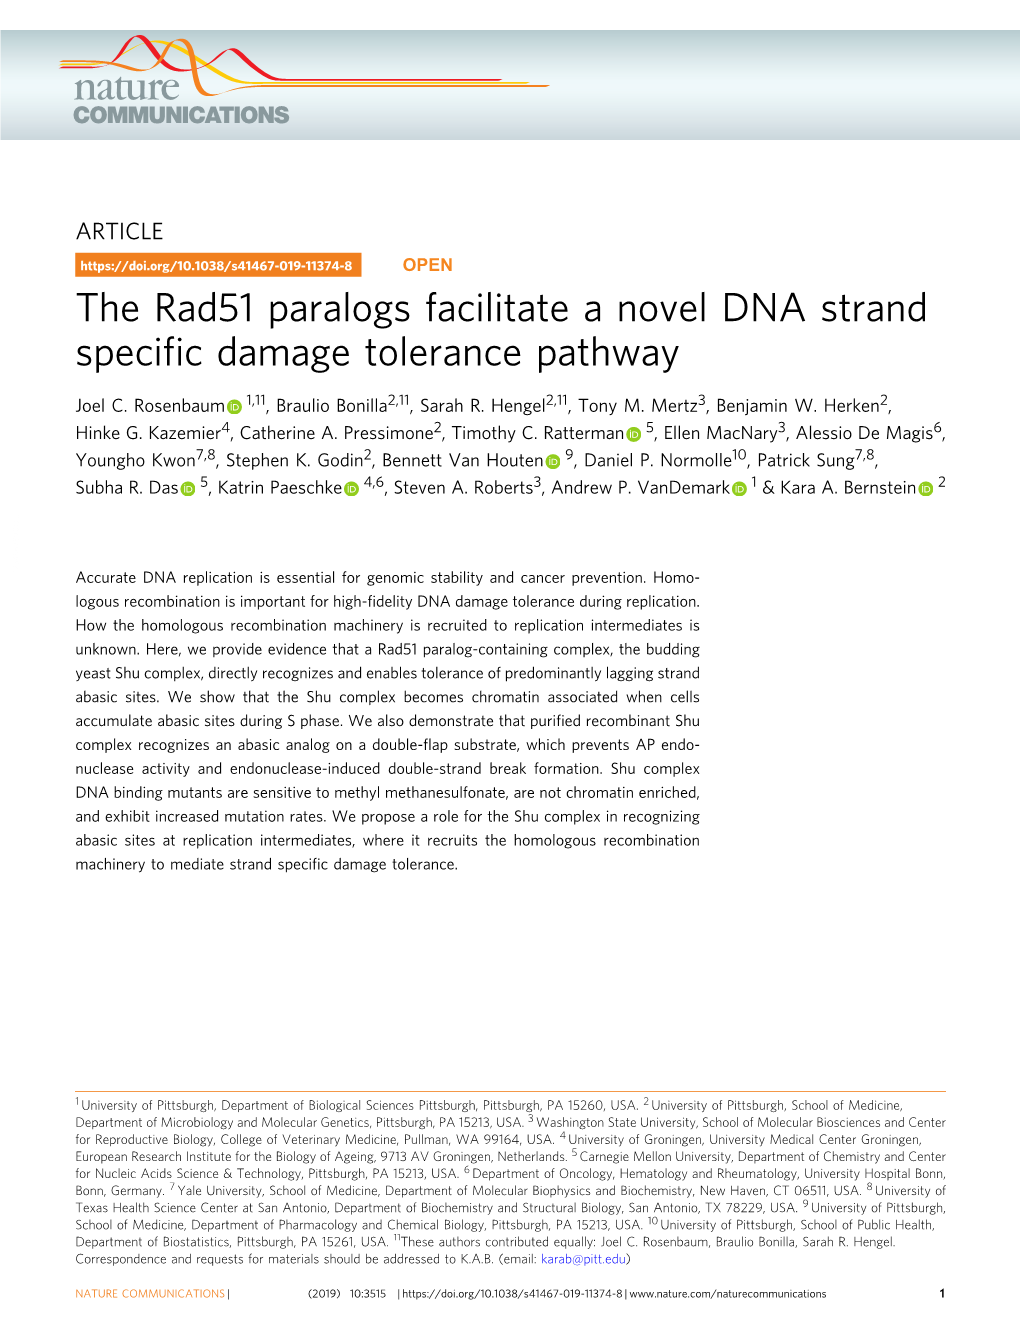 The Rad51 Paralogs Facilitate a Novel DNA Strand Specific Damage Tolerance Pathway